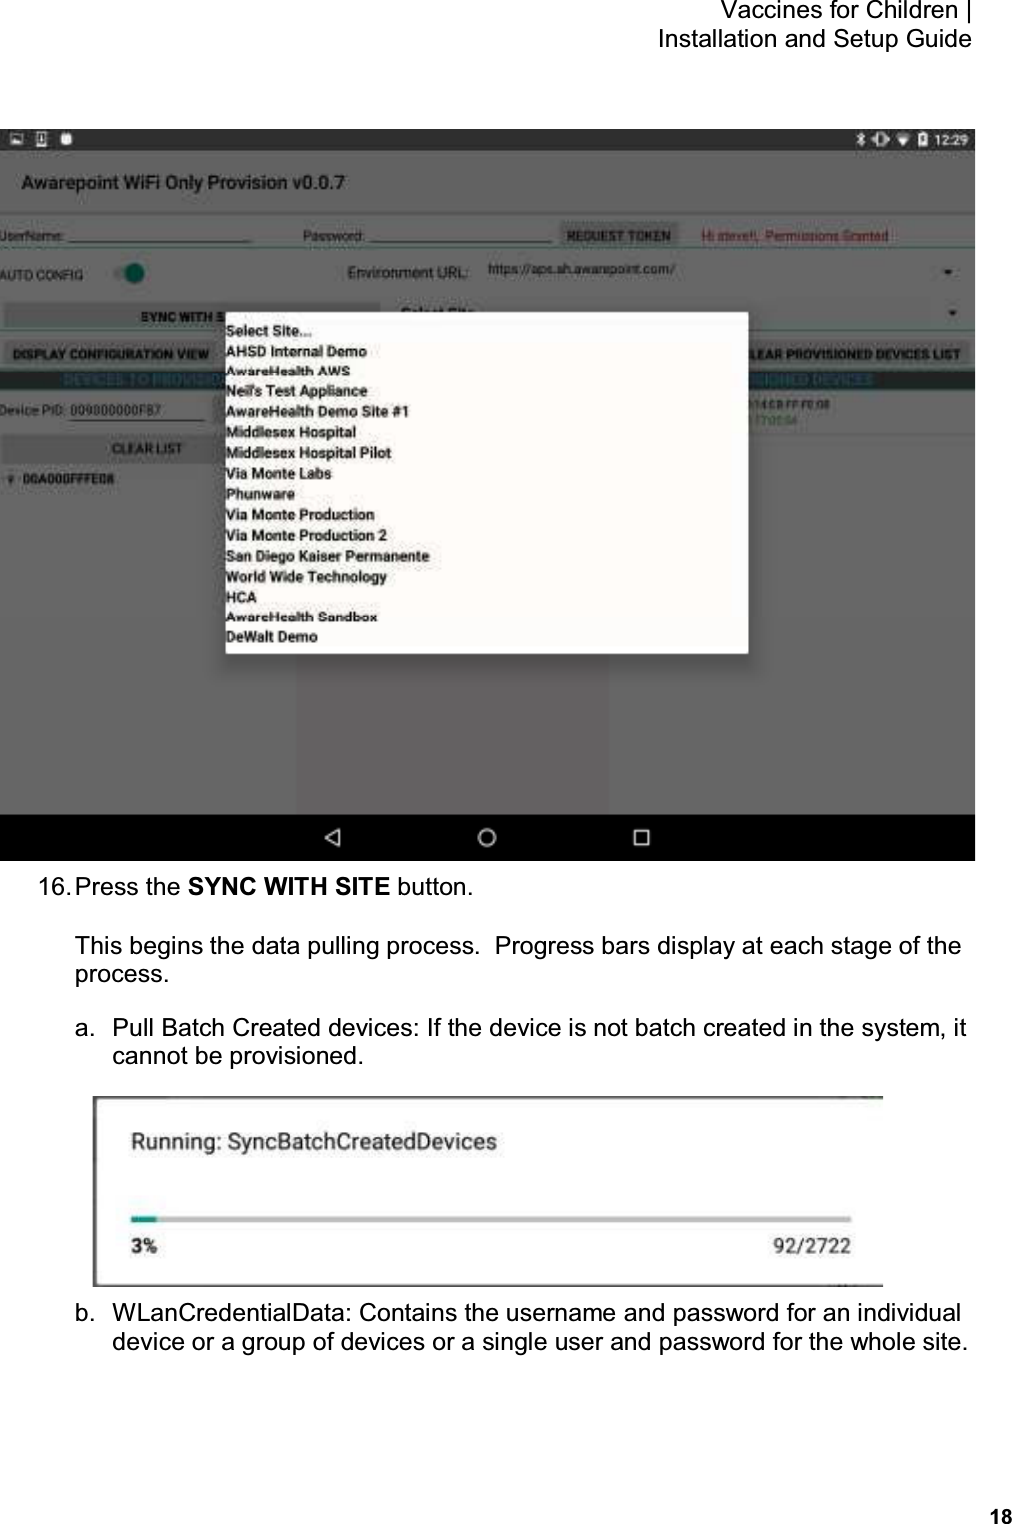           18 Vaccines for Children |  Installation and Setup Guide  16. Press the SYNC WITH SITE button. This begins the data pulling process.  Progress bars display at each stage of the process. a.  Pull Batch Created devices: If the device is not batch created in the system, it cannot be provisioned.  b.  WLanCredentialData: Contains the username and password for an individual device or a group of devices or a single user and password for the whole site. 